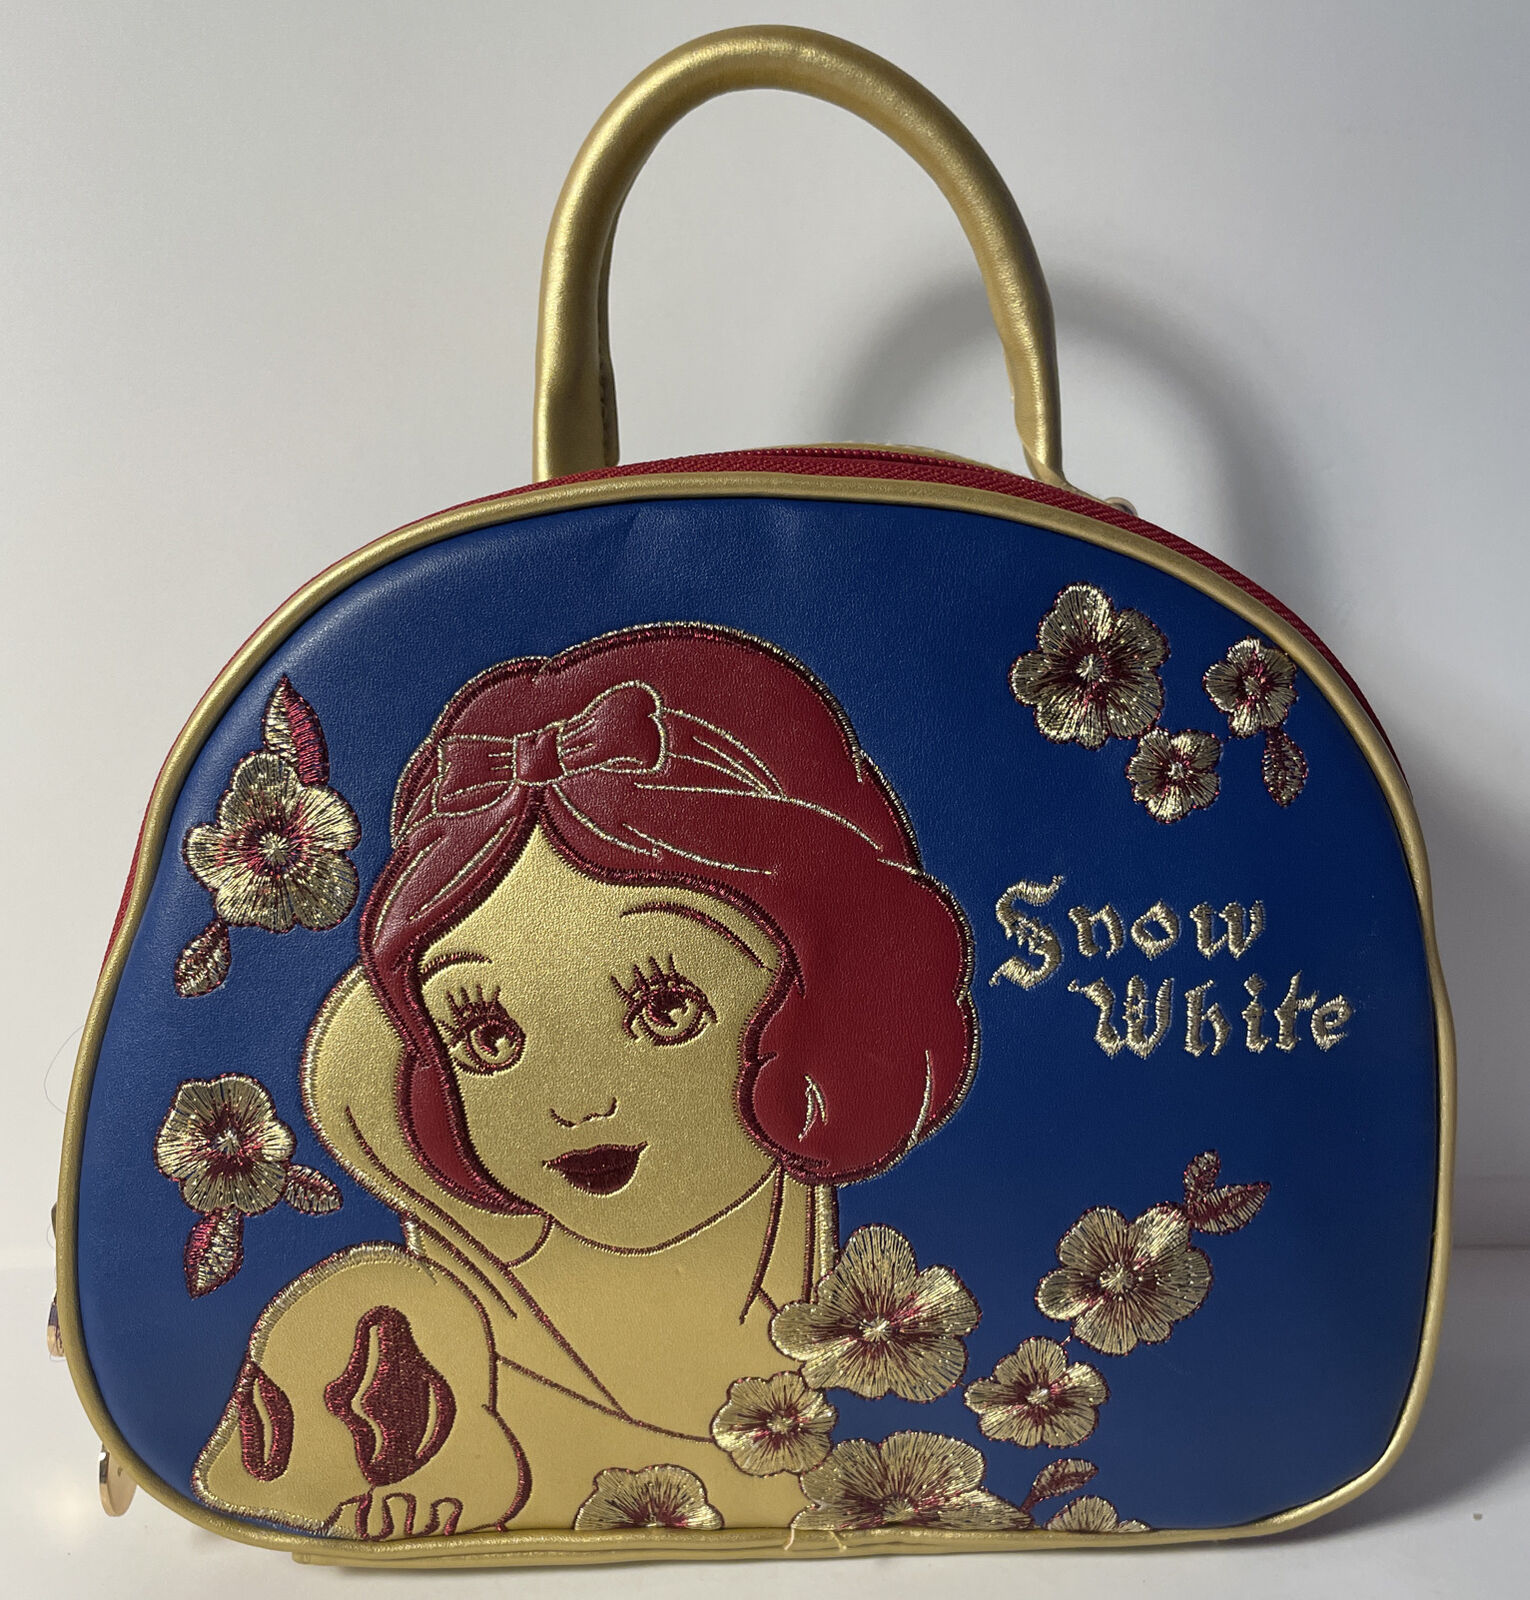 Disney 1937 Snow White Collection Makeup Bag Gold/Blue/Maroon Soft Embroidered